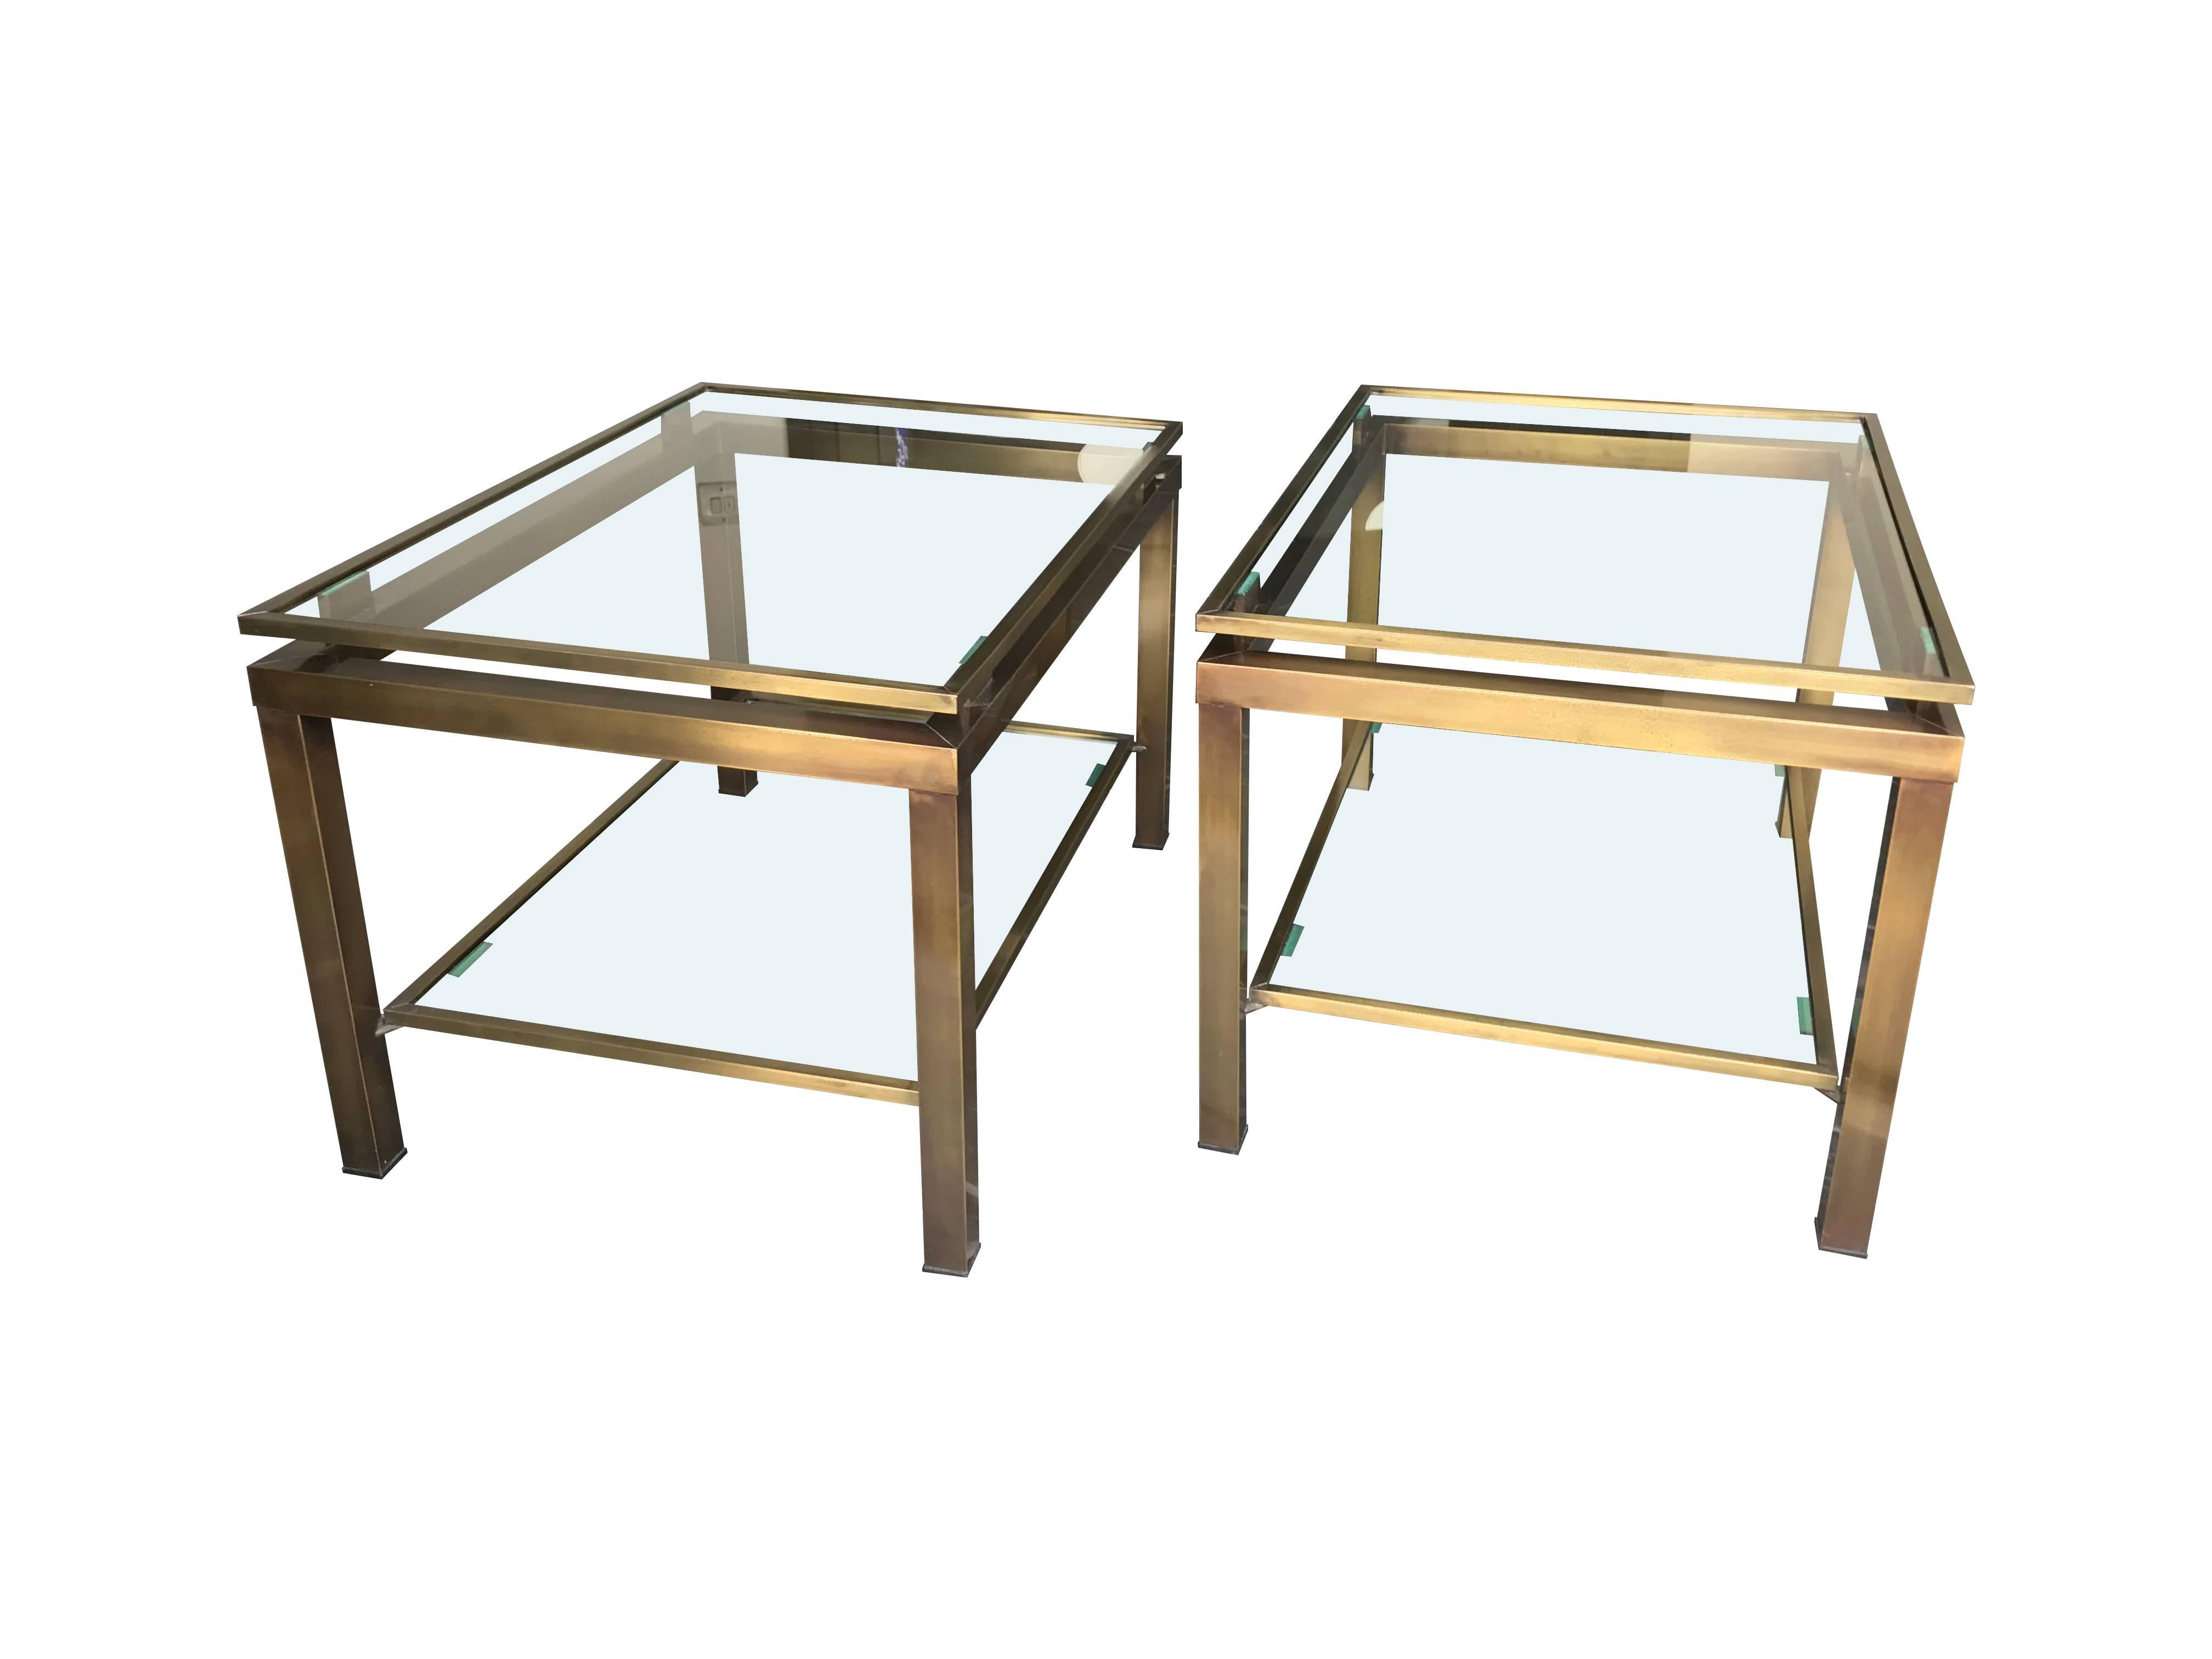 A pair of Guy Lefevre side tables in gilt metal with two glass shelves and signature floating top shelf.